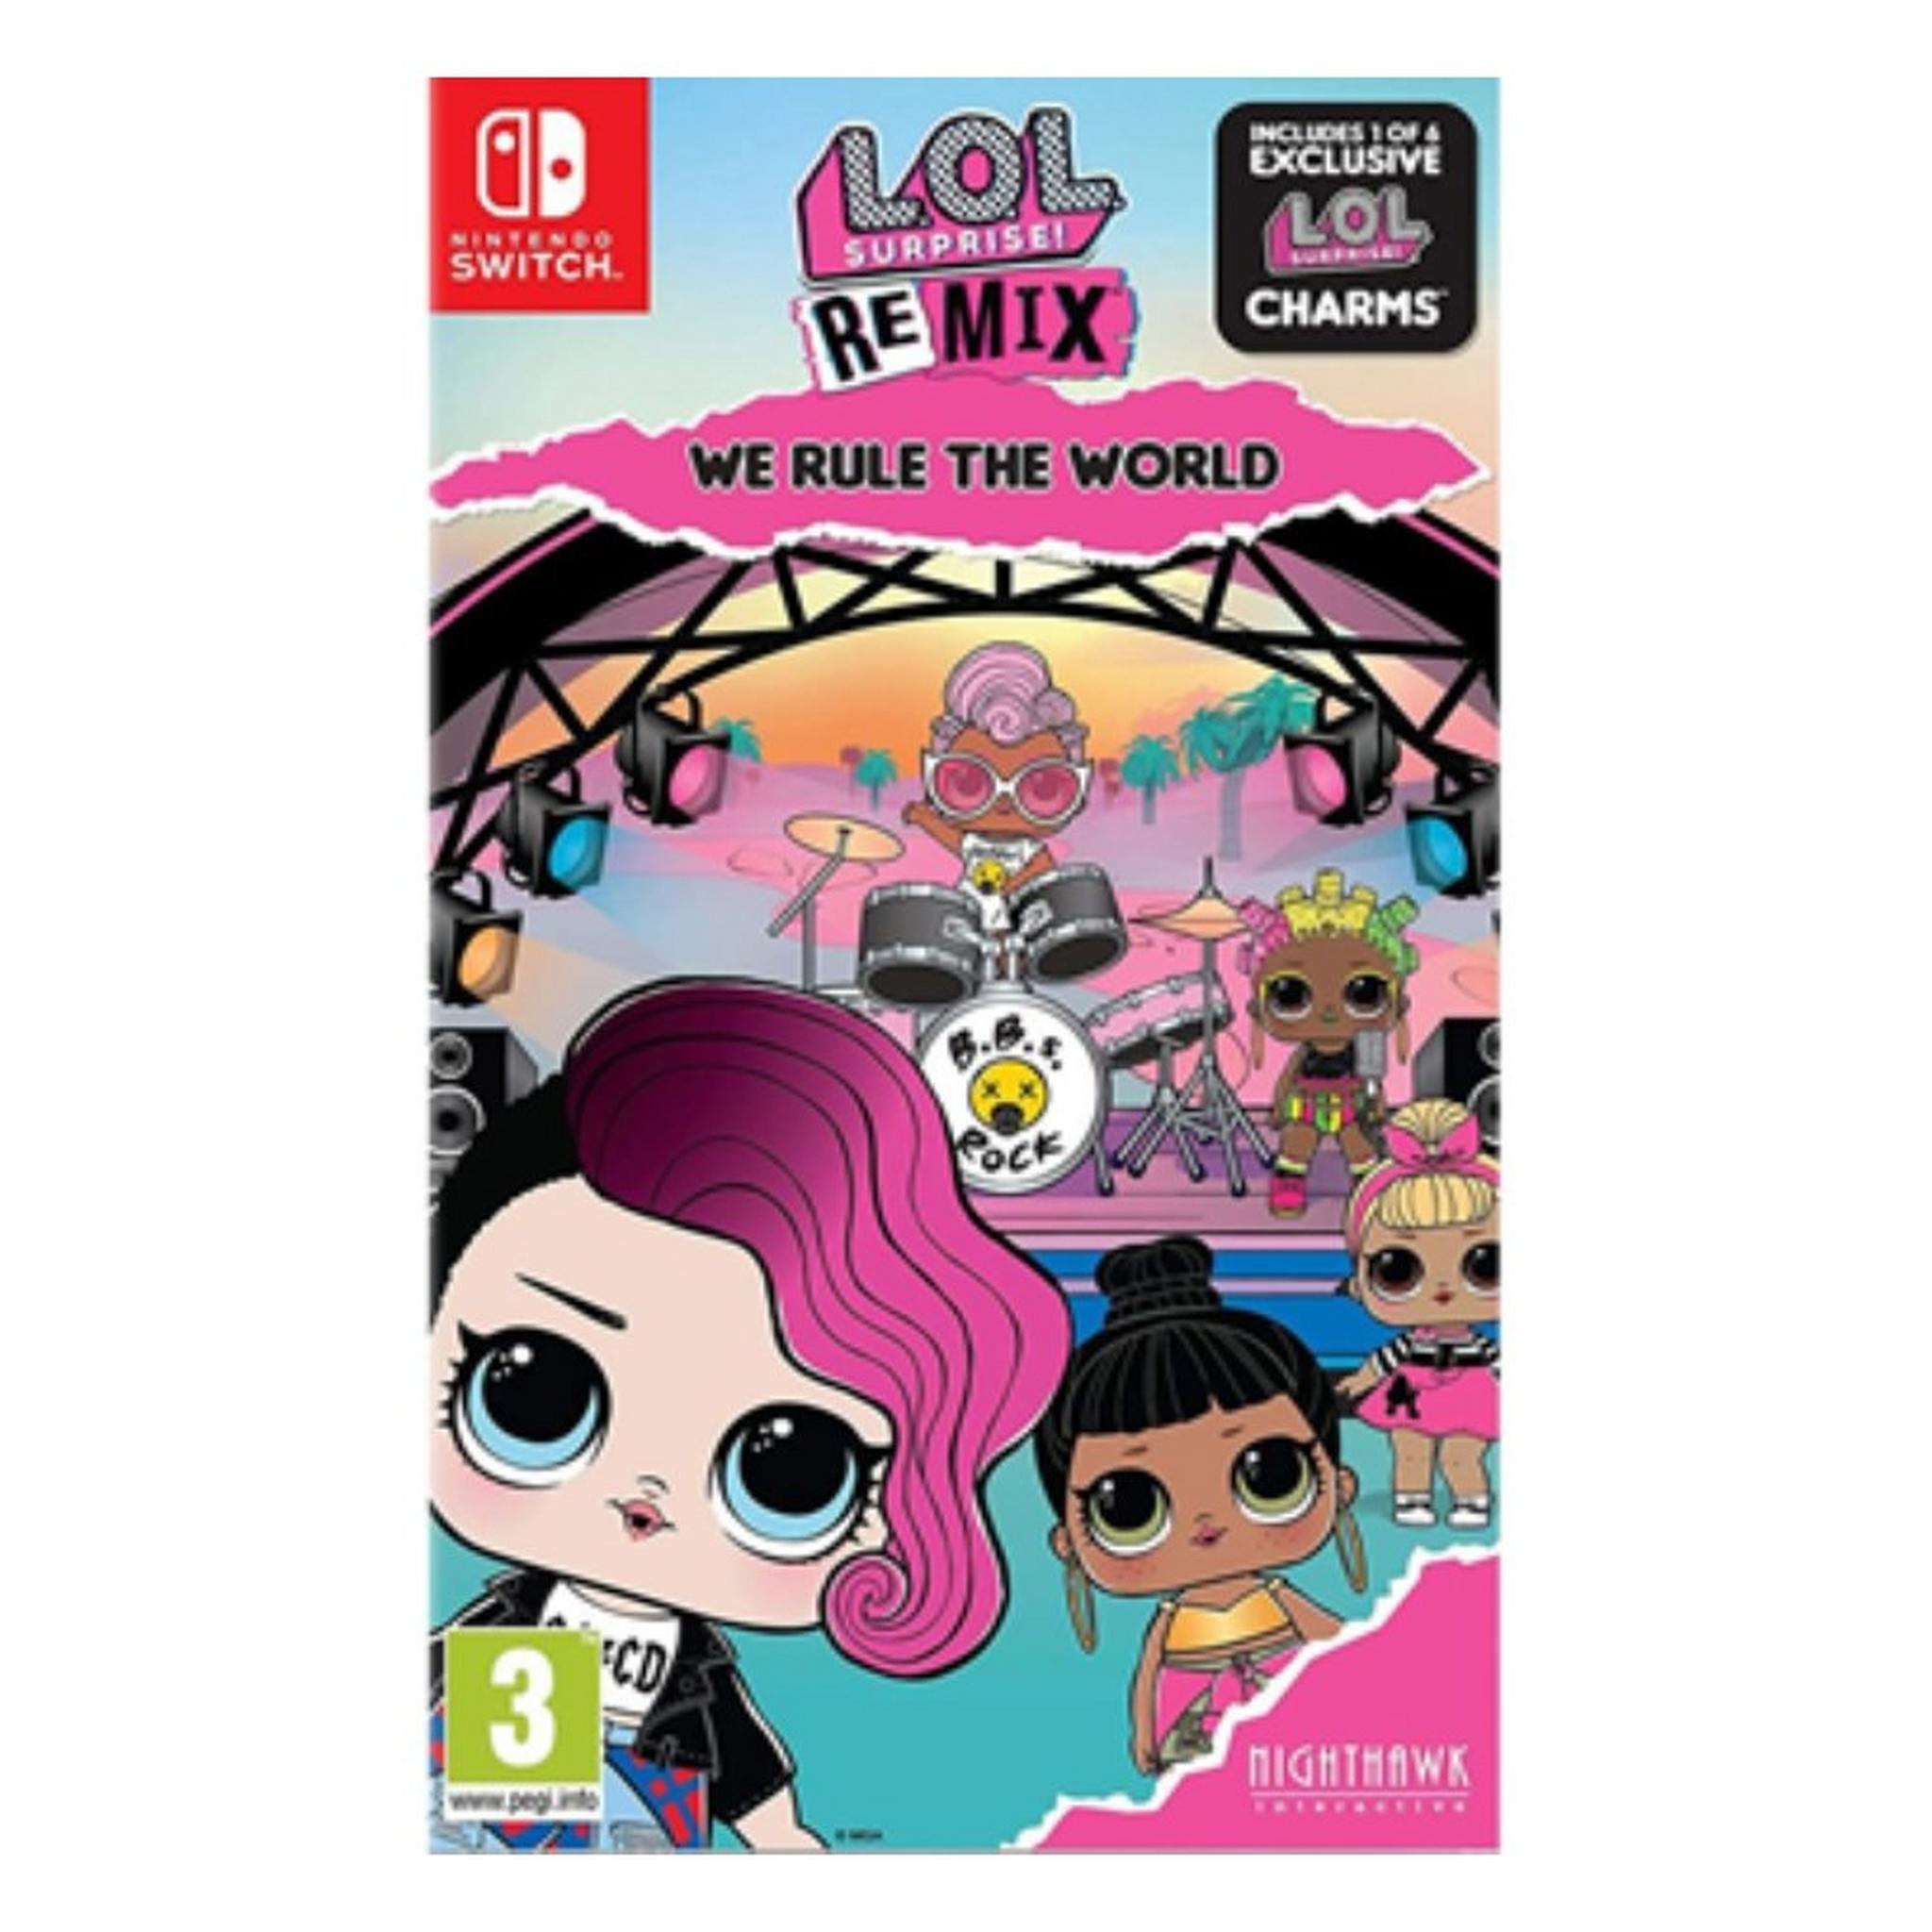 L.O.L. Surprise! Remix: We Rule The World Game - Nintendo Switch